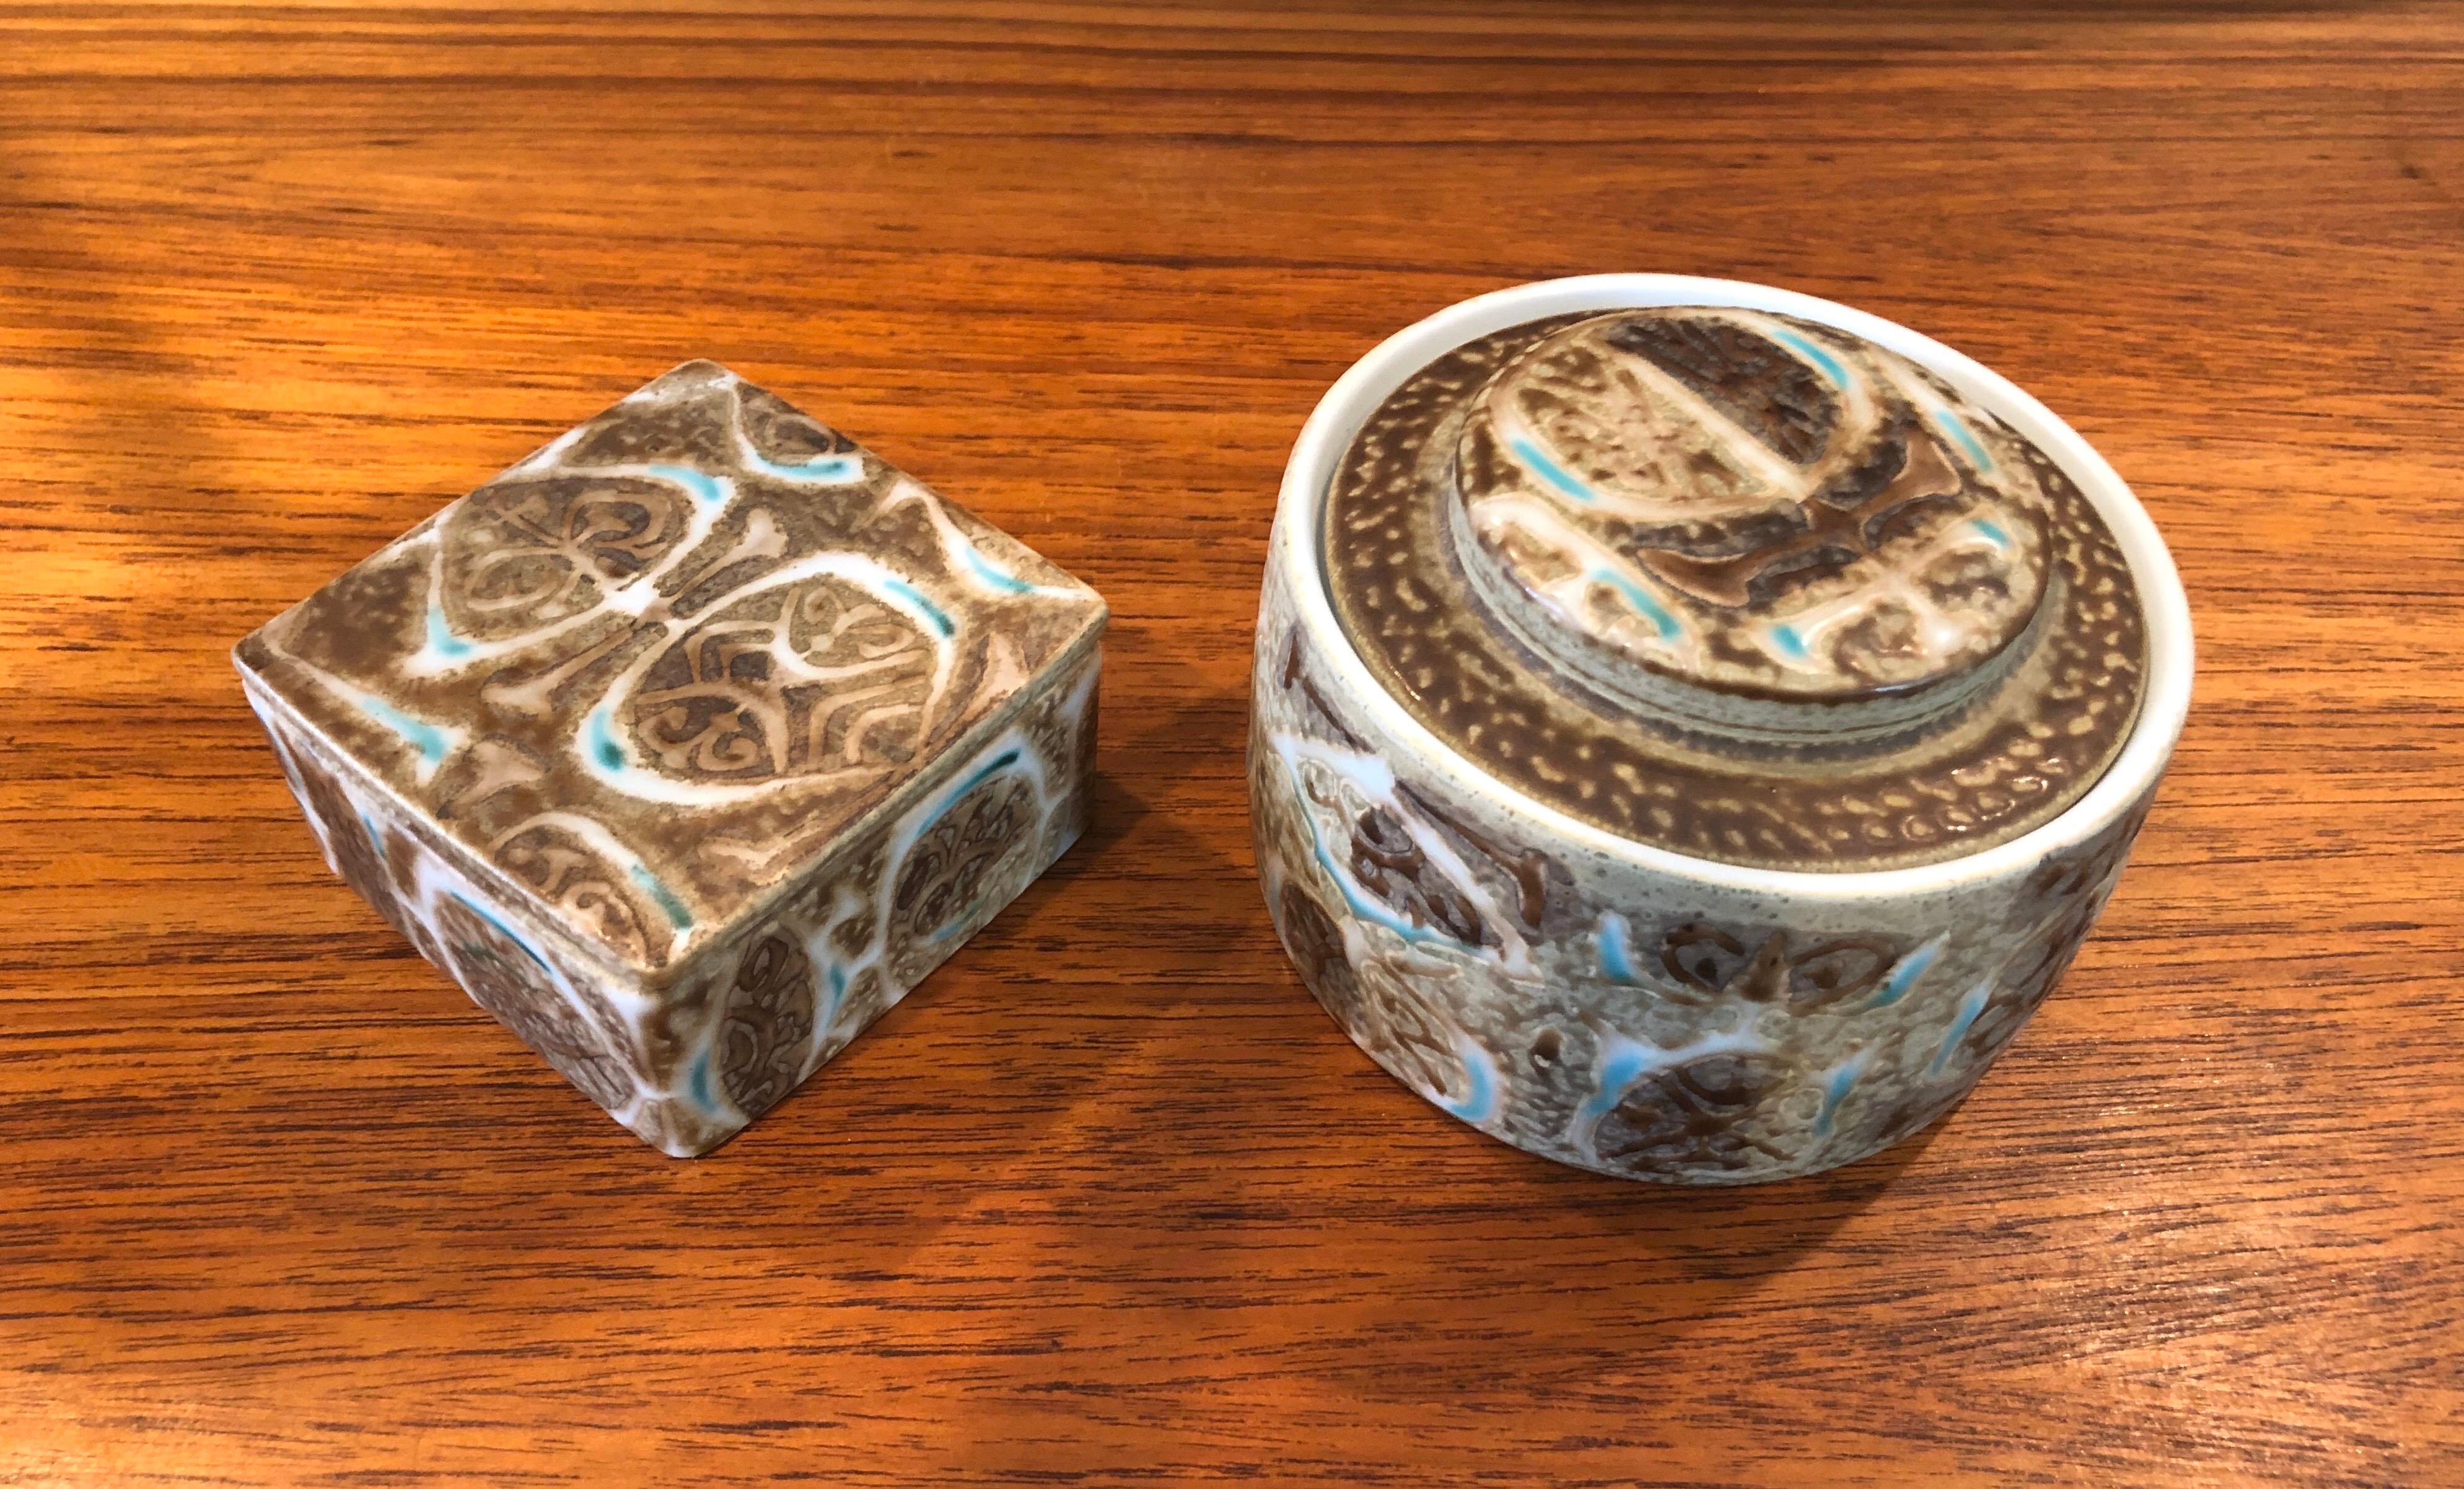 Wonderful Fajance lidded box and jar from the Baca line by Nils Thorsson for Royal Copenhagen, circa 1960s. The brown, tan and blue glazed stoneware containers with geometric abstract design was designed by Royal Copenhagen's renowned artistic